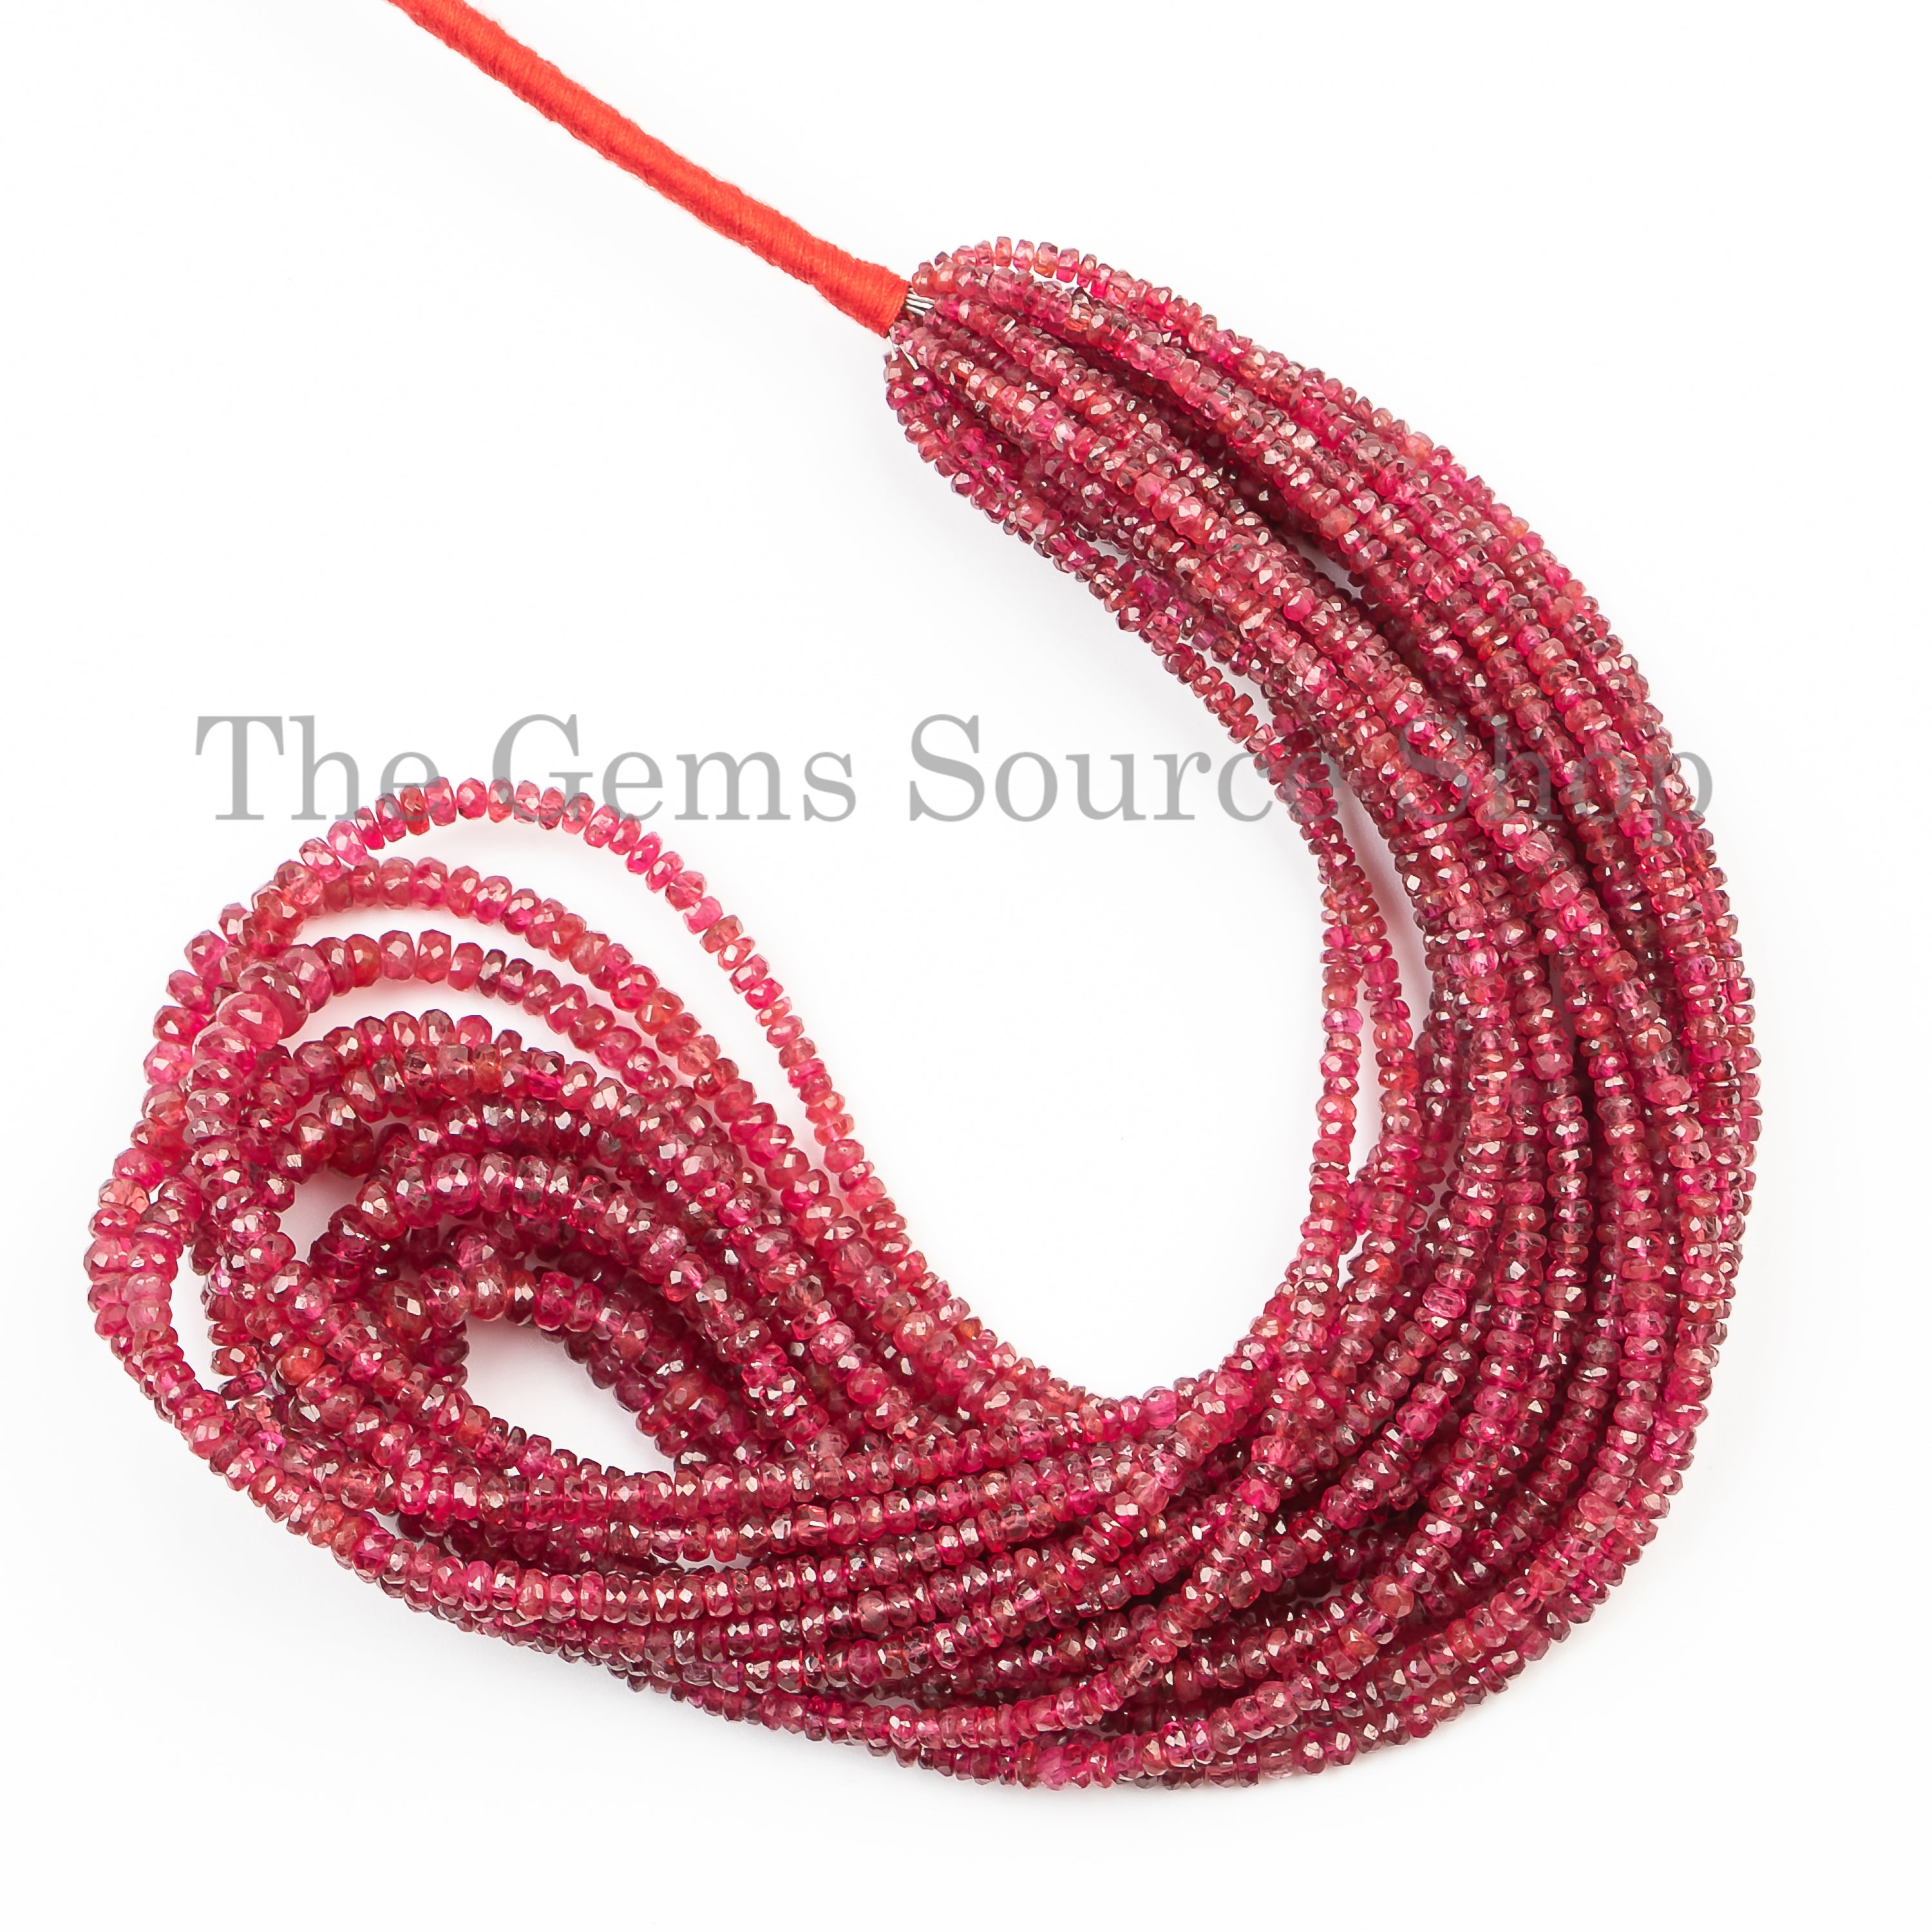 Rare Red Spinel Beads, Spinel Rondelle Beads, Spinel Faceted Beads, Spinel Gemstone Beads